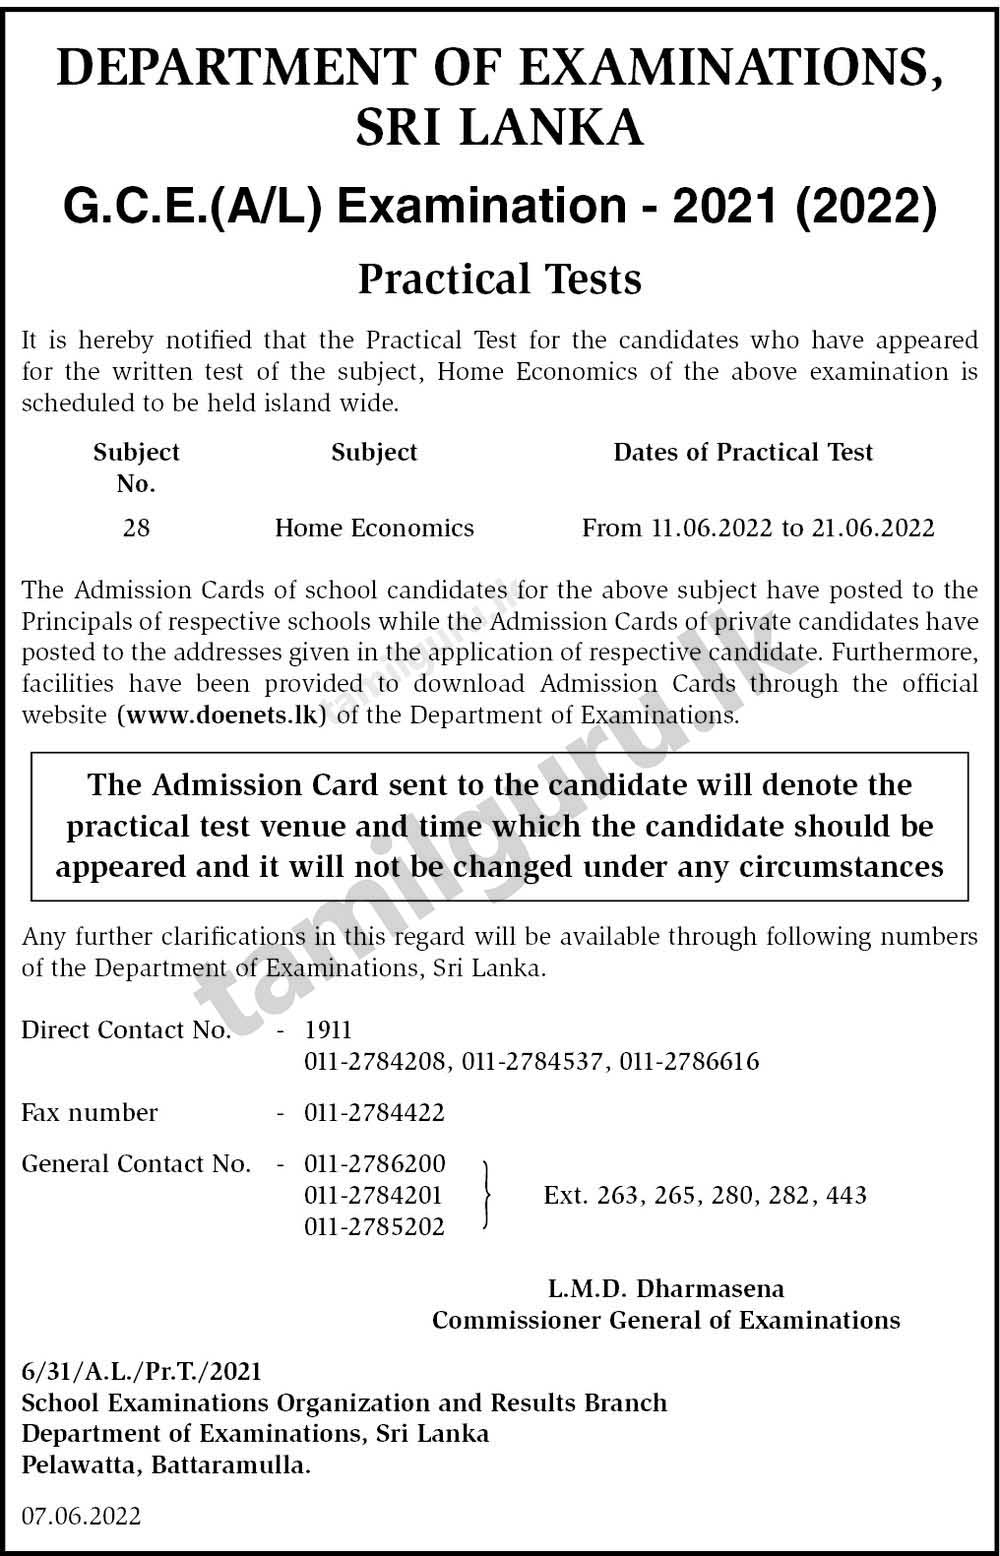 Notice and Admission Card for Practical Tests (Home Economics) - G.C.E. A/L Examination 2021 (2022) (Details in English)